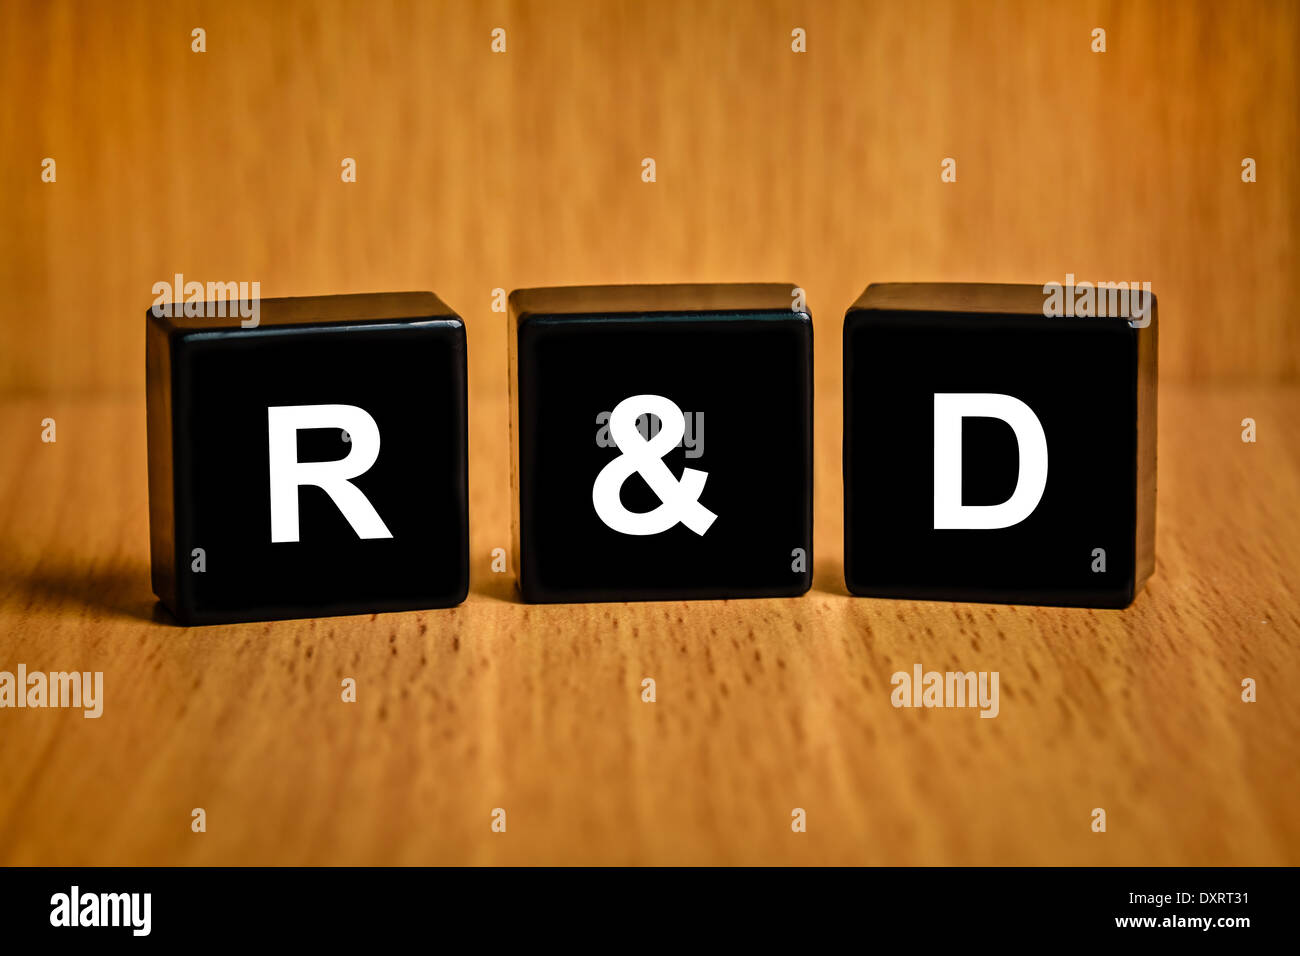 r&d or Research and development text on black block, business concept Stock Photo